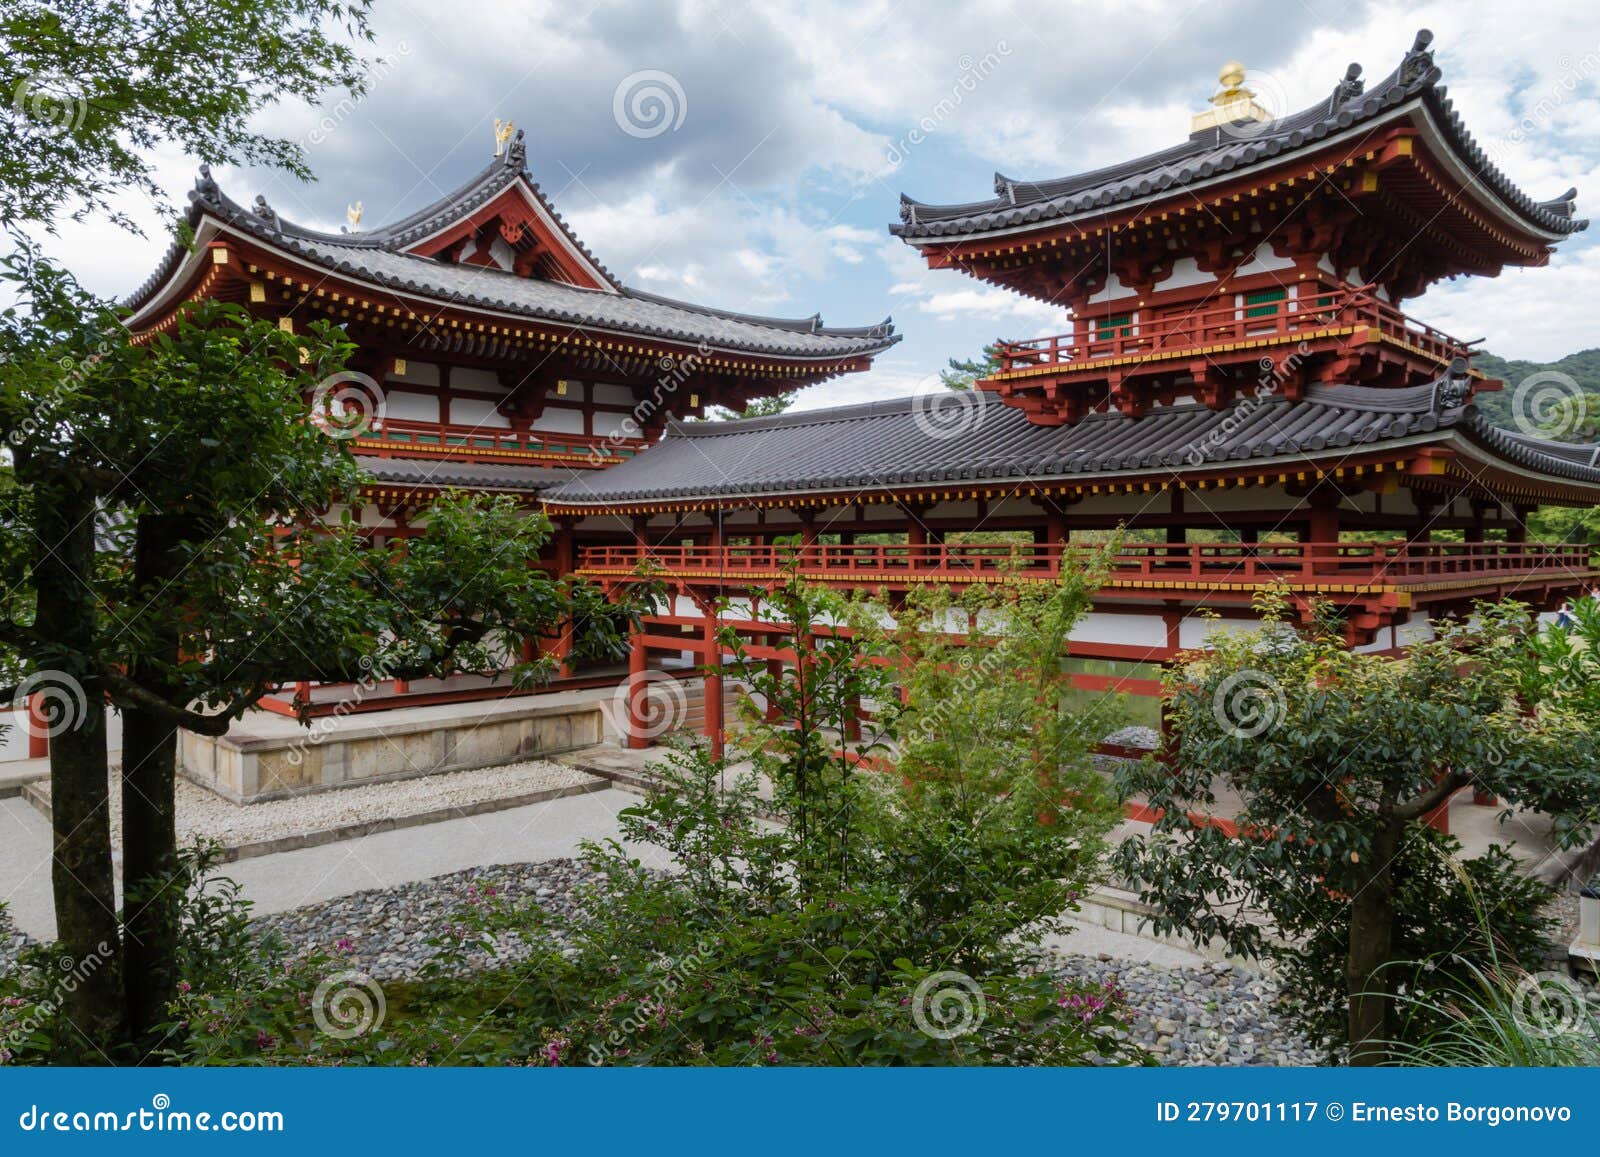 millenary temple of the city of uji in kyoto